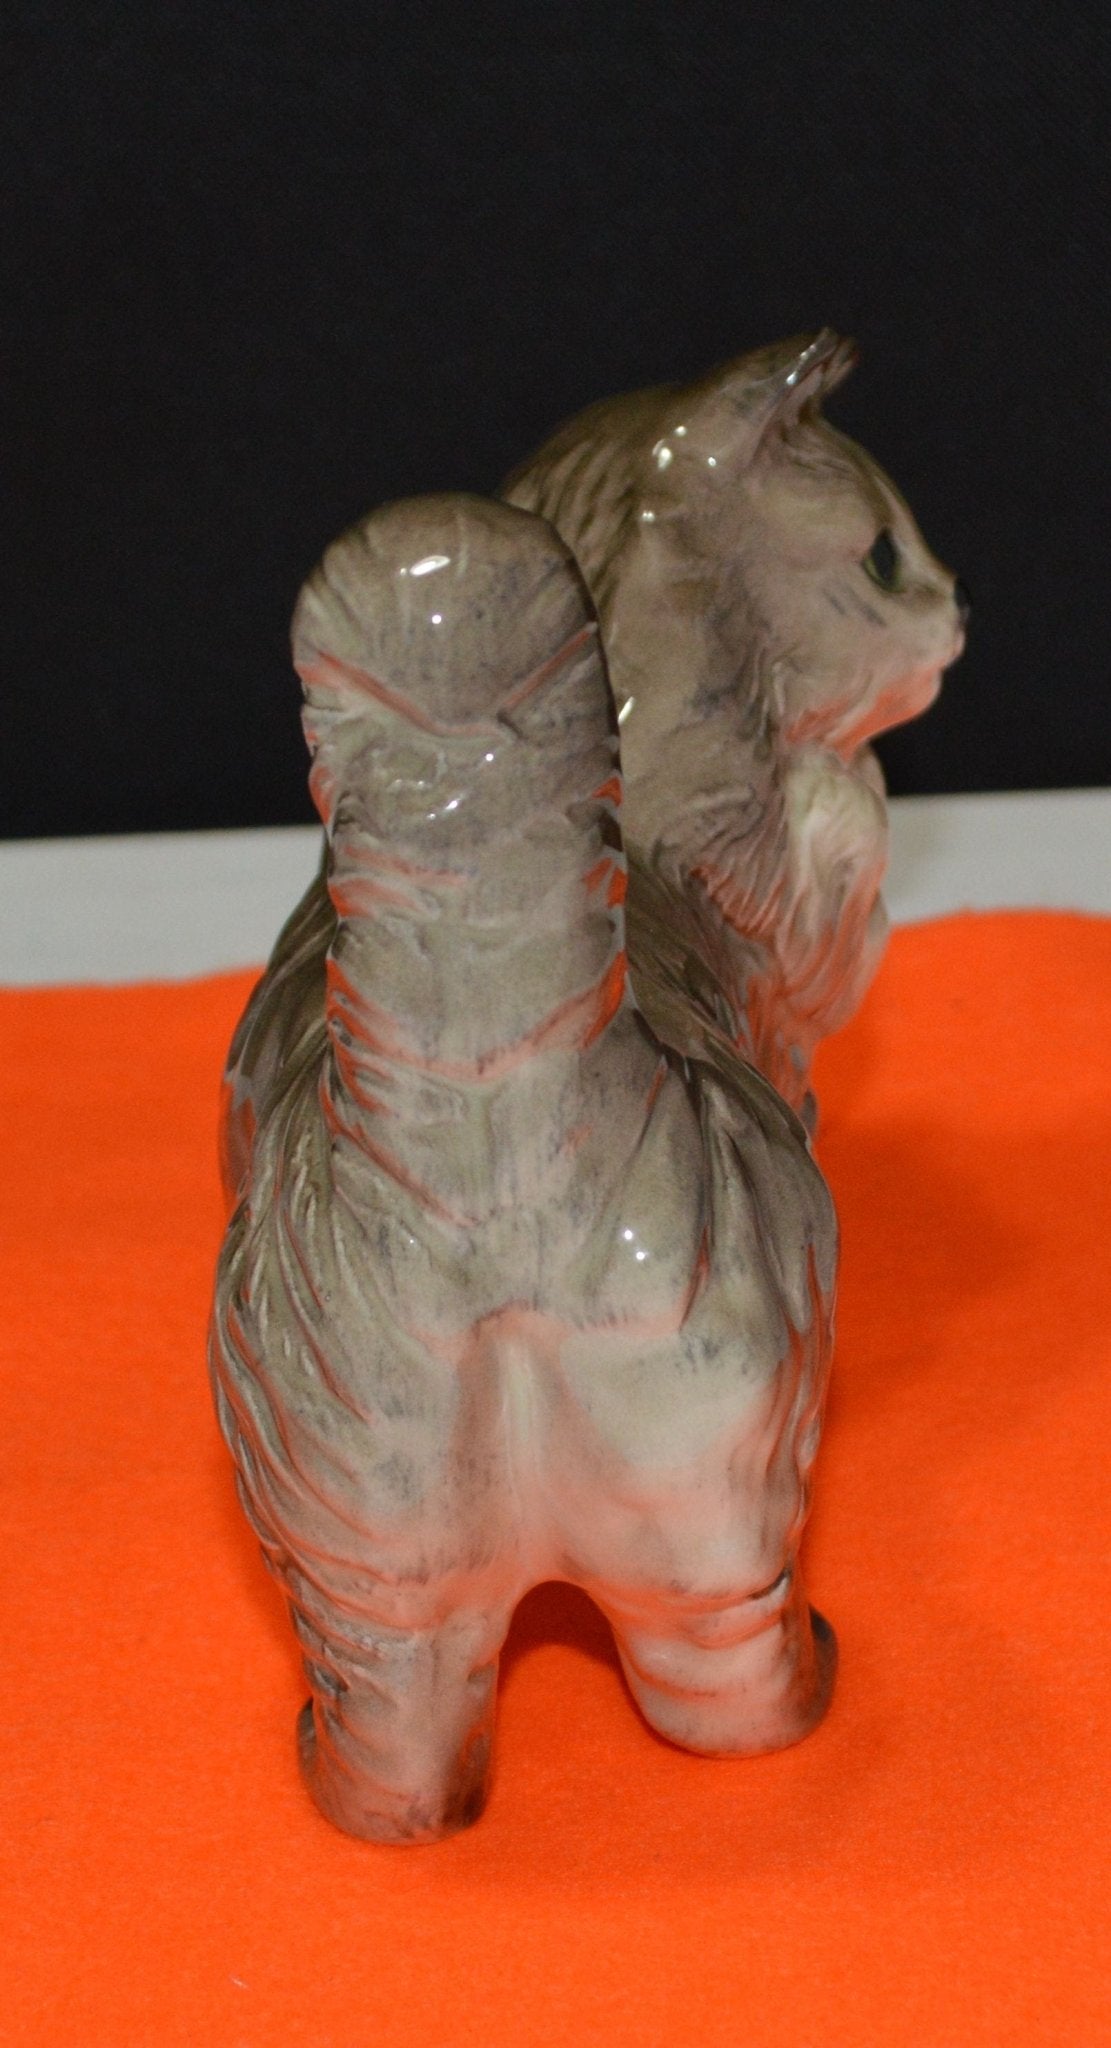 BESWICK SMALL PERSIAN GREY CAT FIGURINE MODEL 1898 (PREVIOUSLY OWNED) VERY GOOD CONDITION - TMD167207